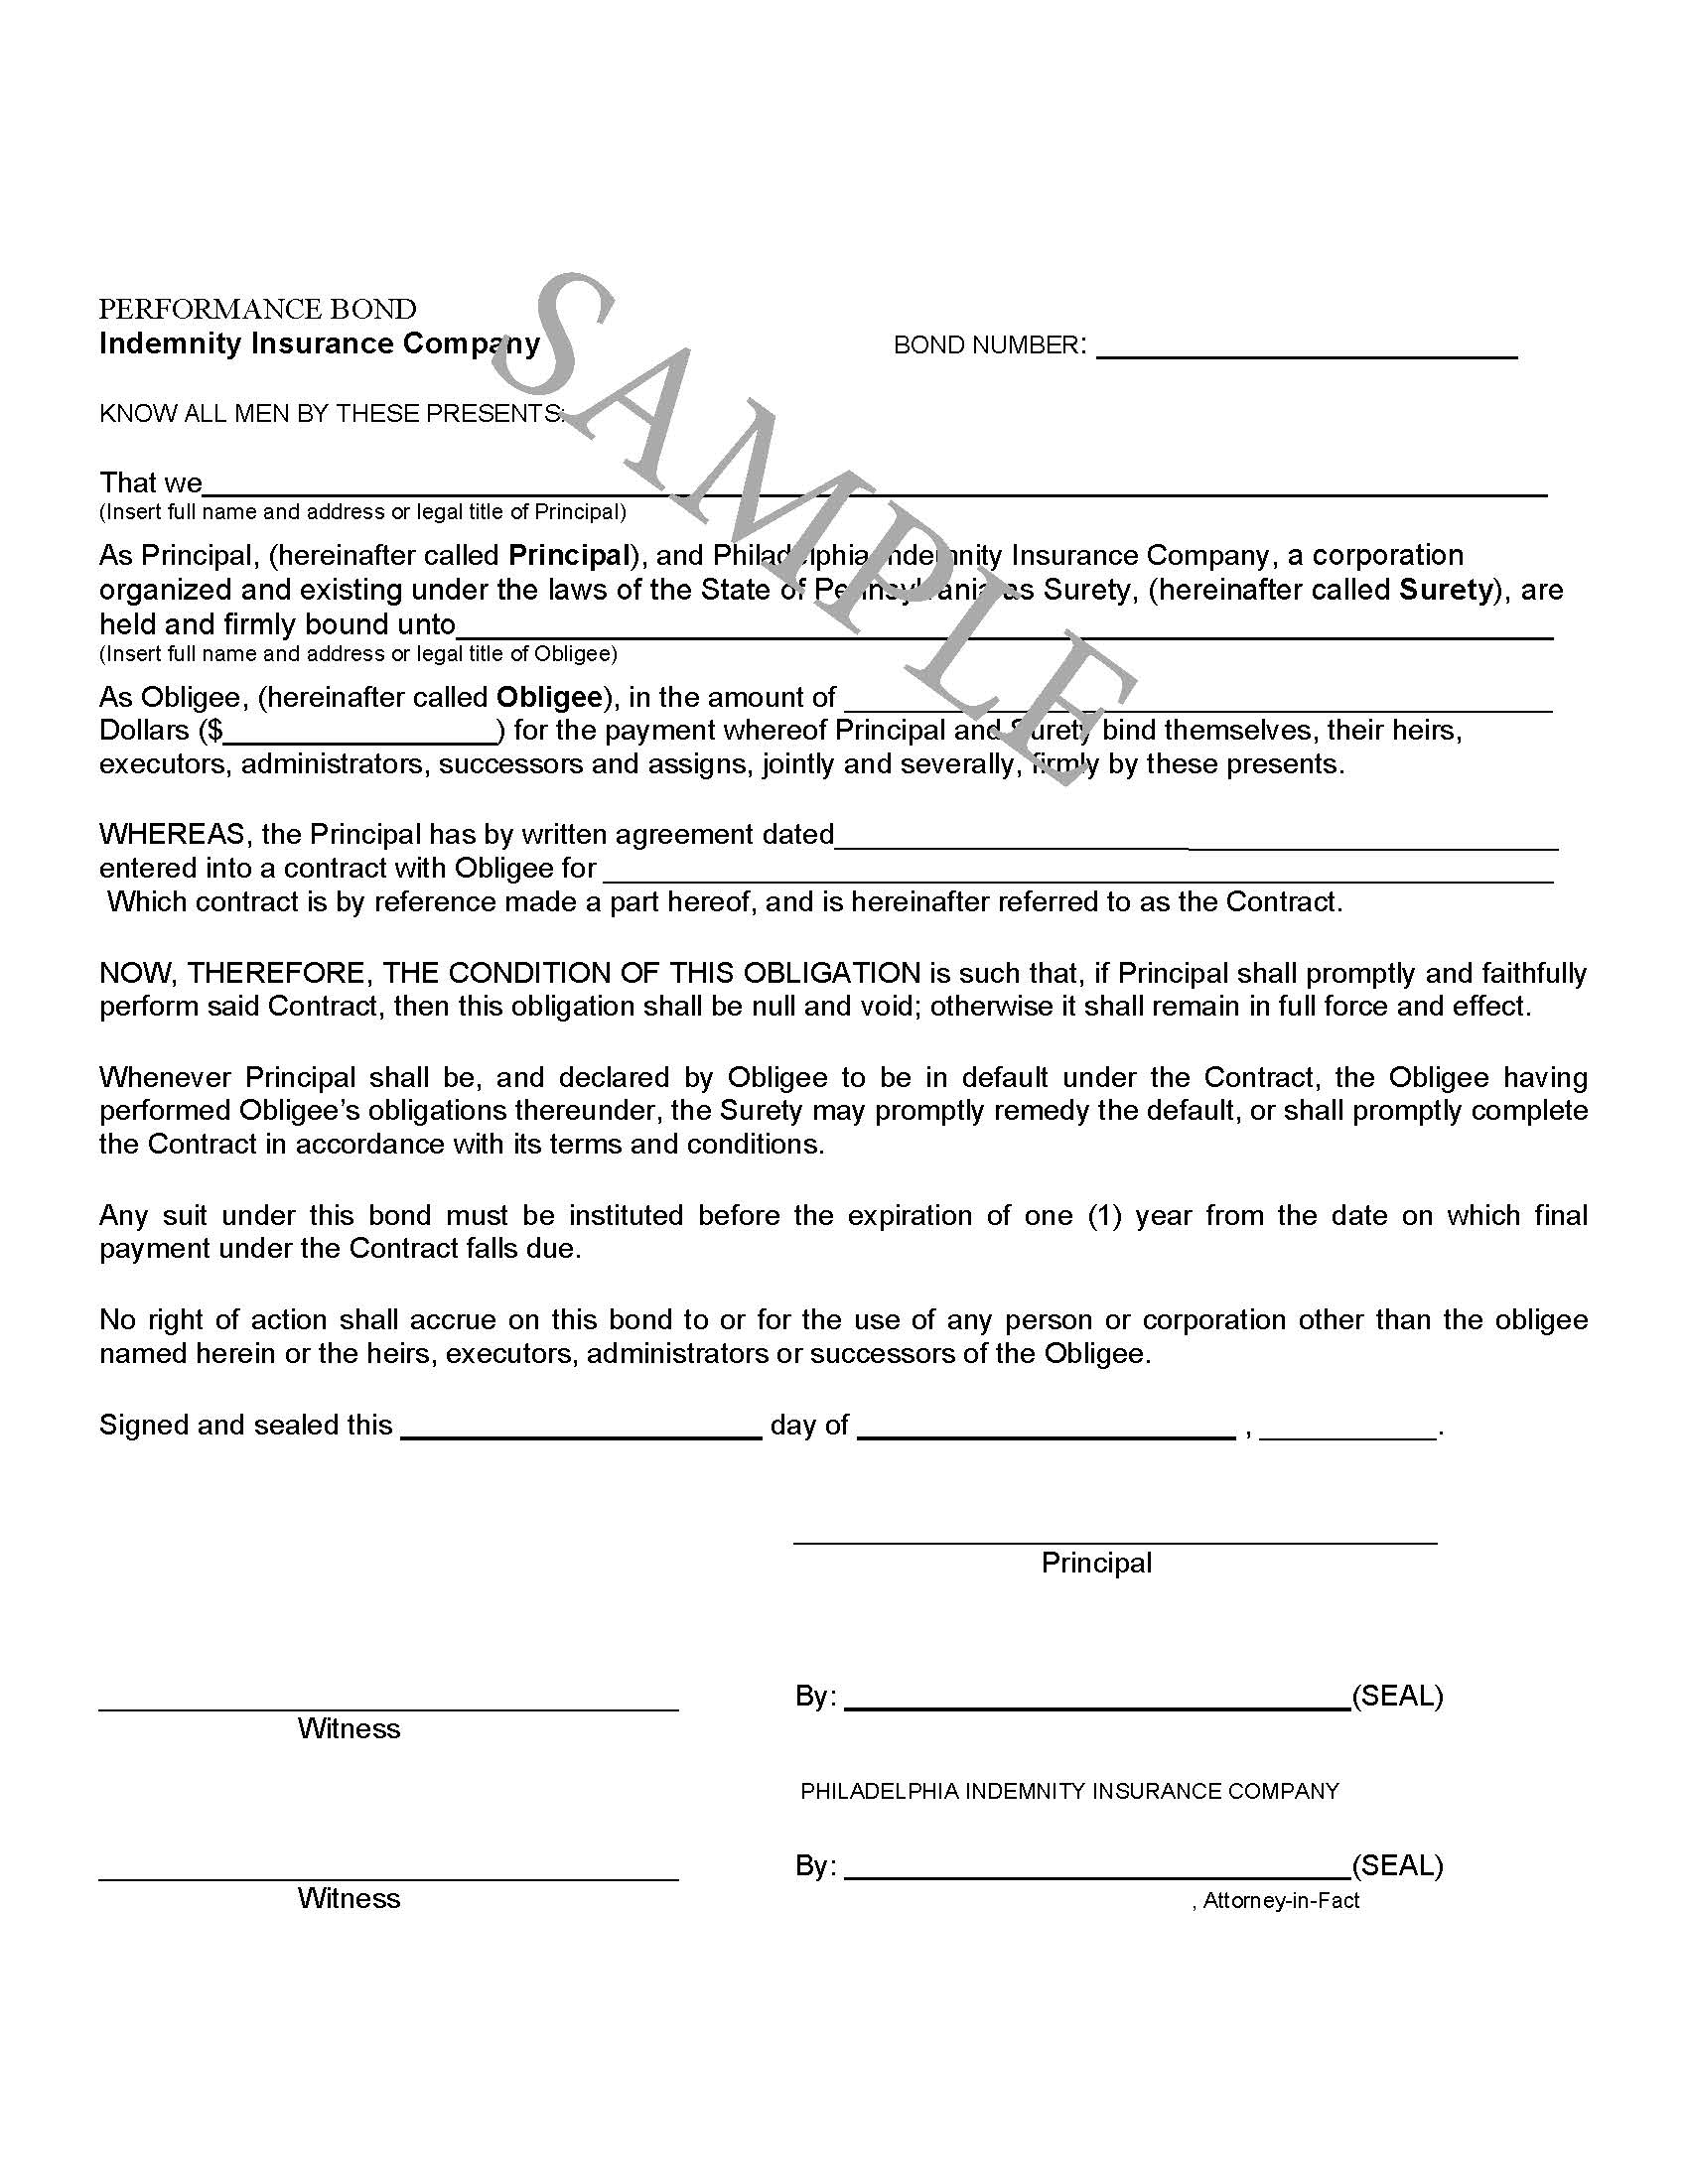 Performance bond - Sample document of a Performance bond in a white colored paper.